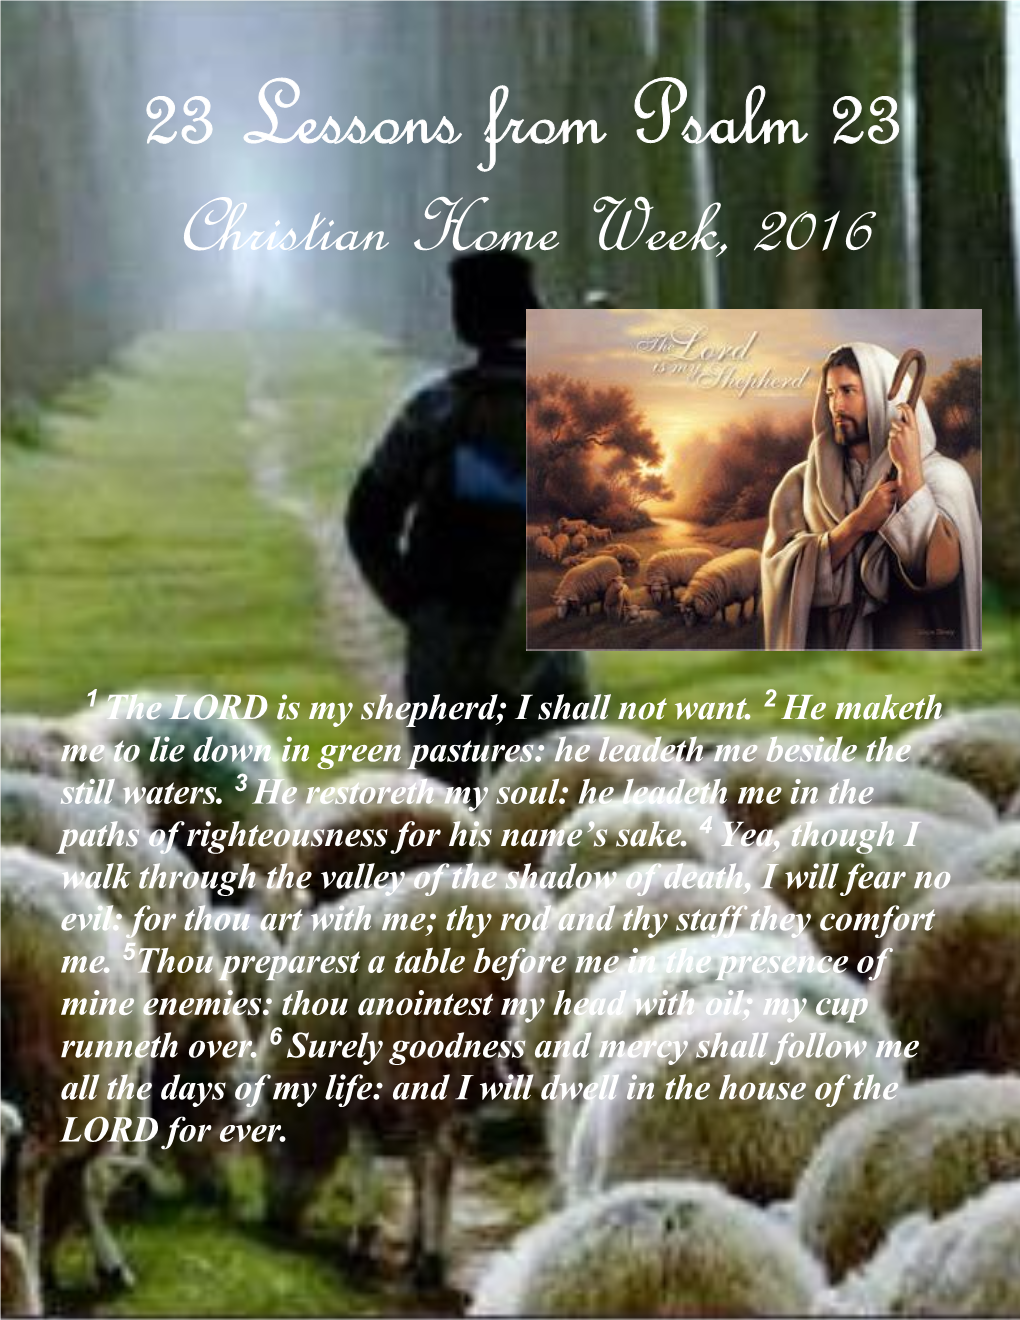 23 Lessons from Psalm 23 Christian Home Week, 2016